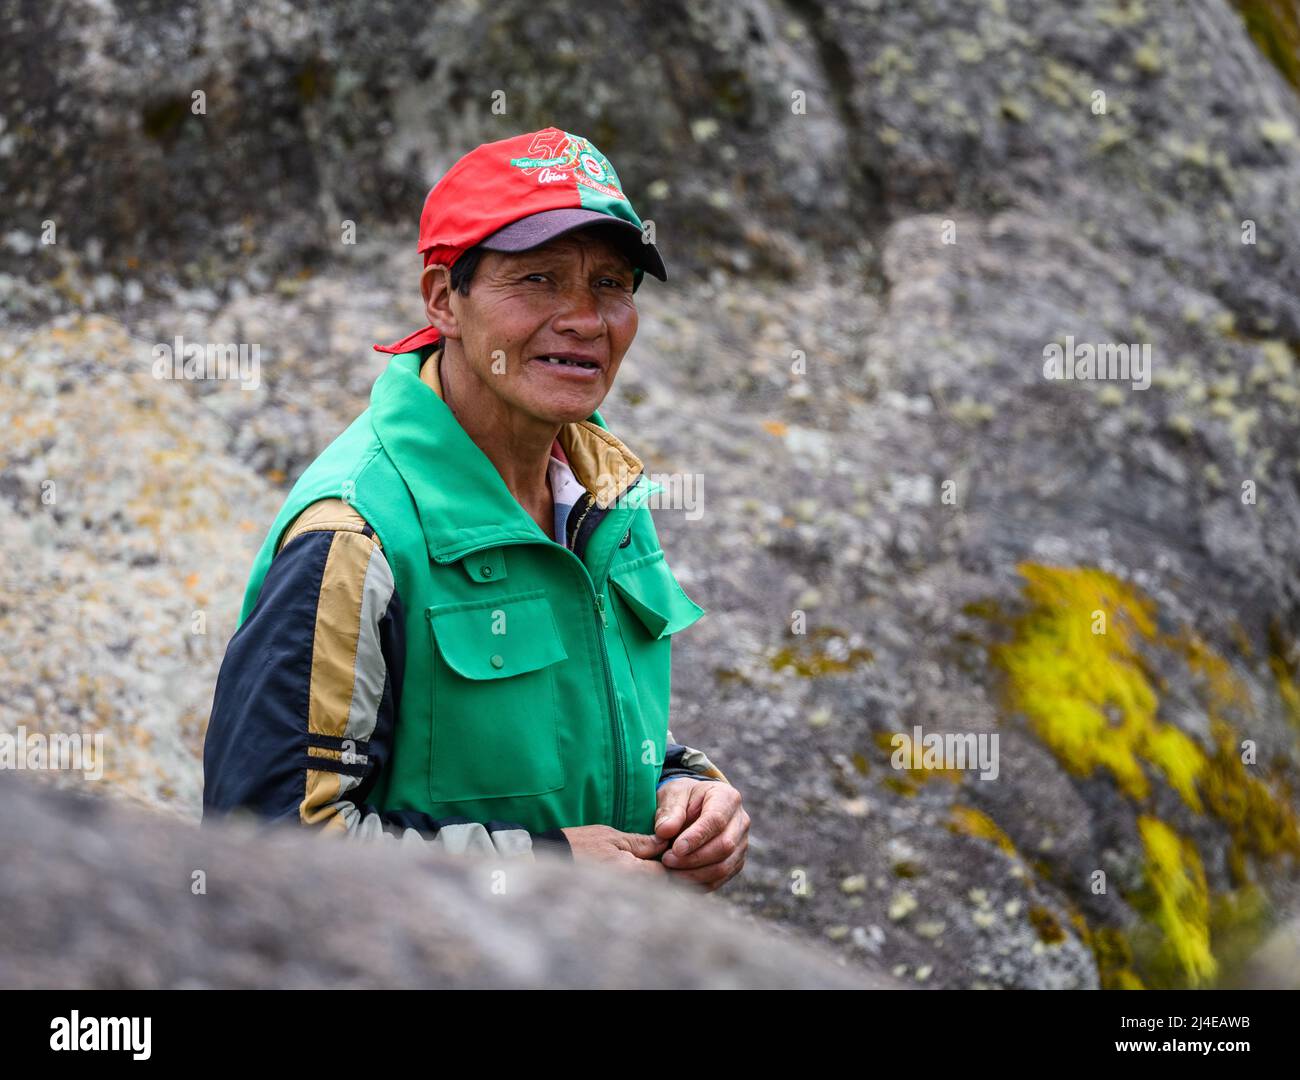 An indigenous man serves as tour guide in the remote Andes. Colombia, South America. Stock Photo